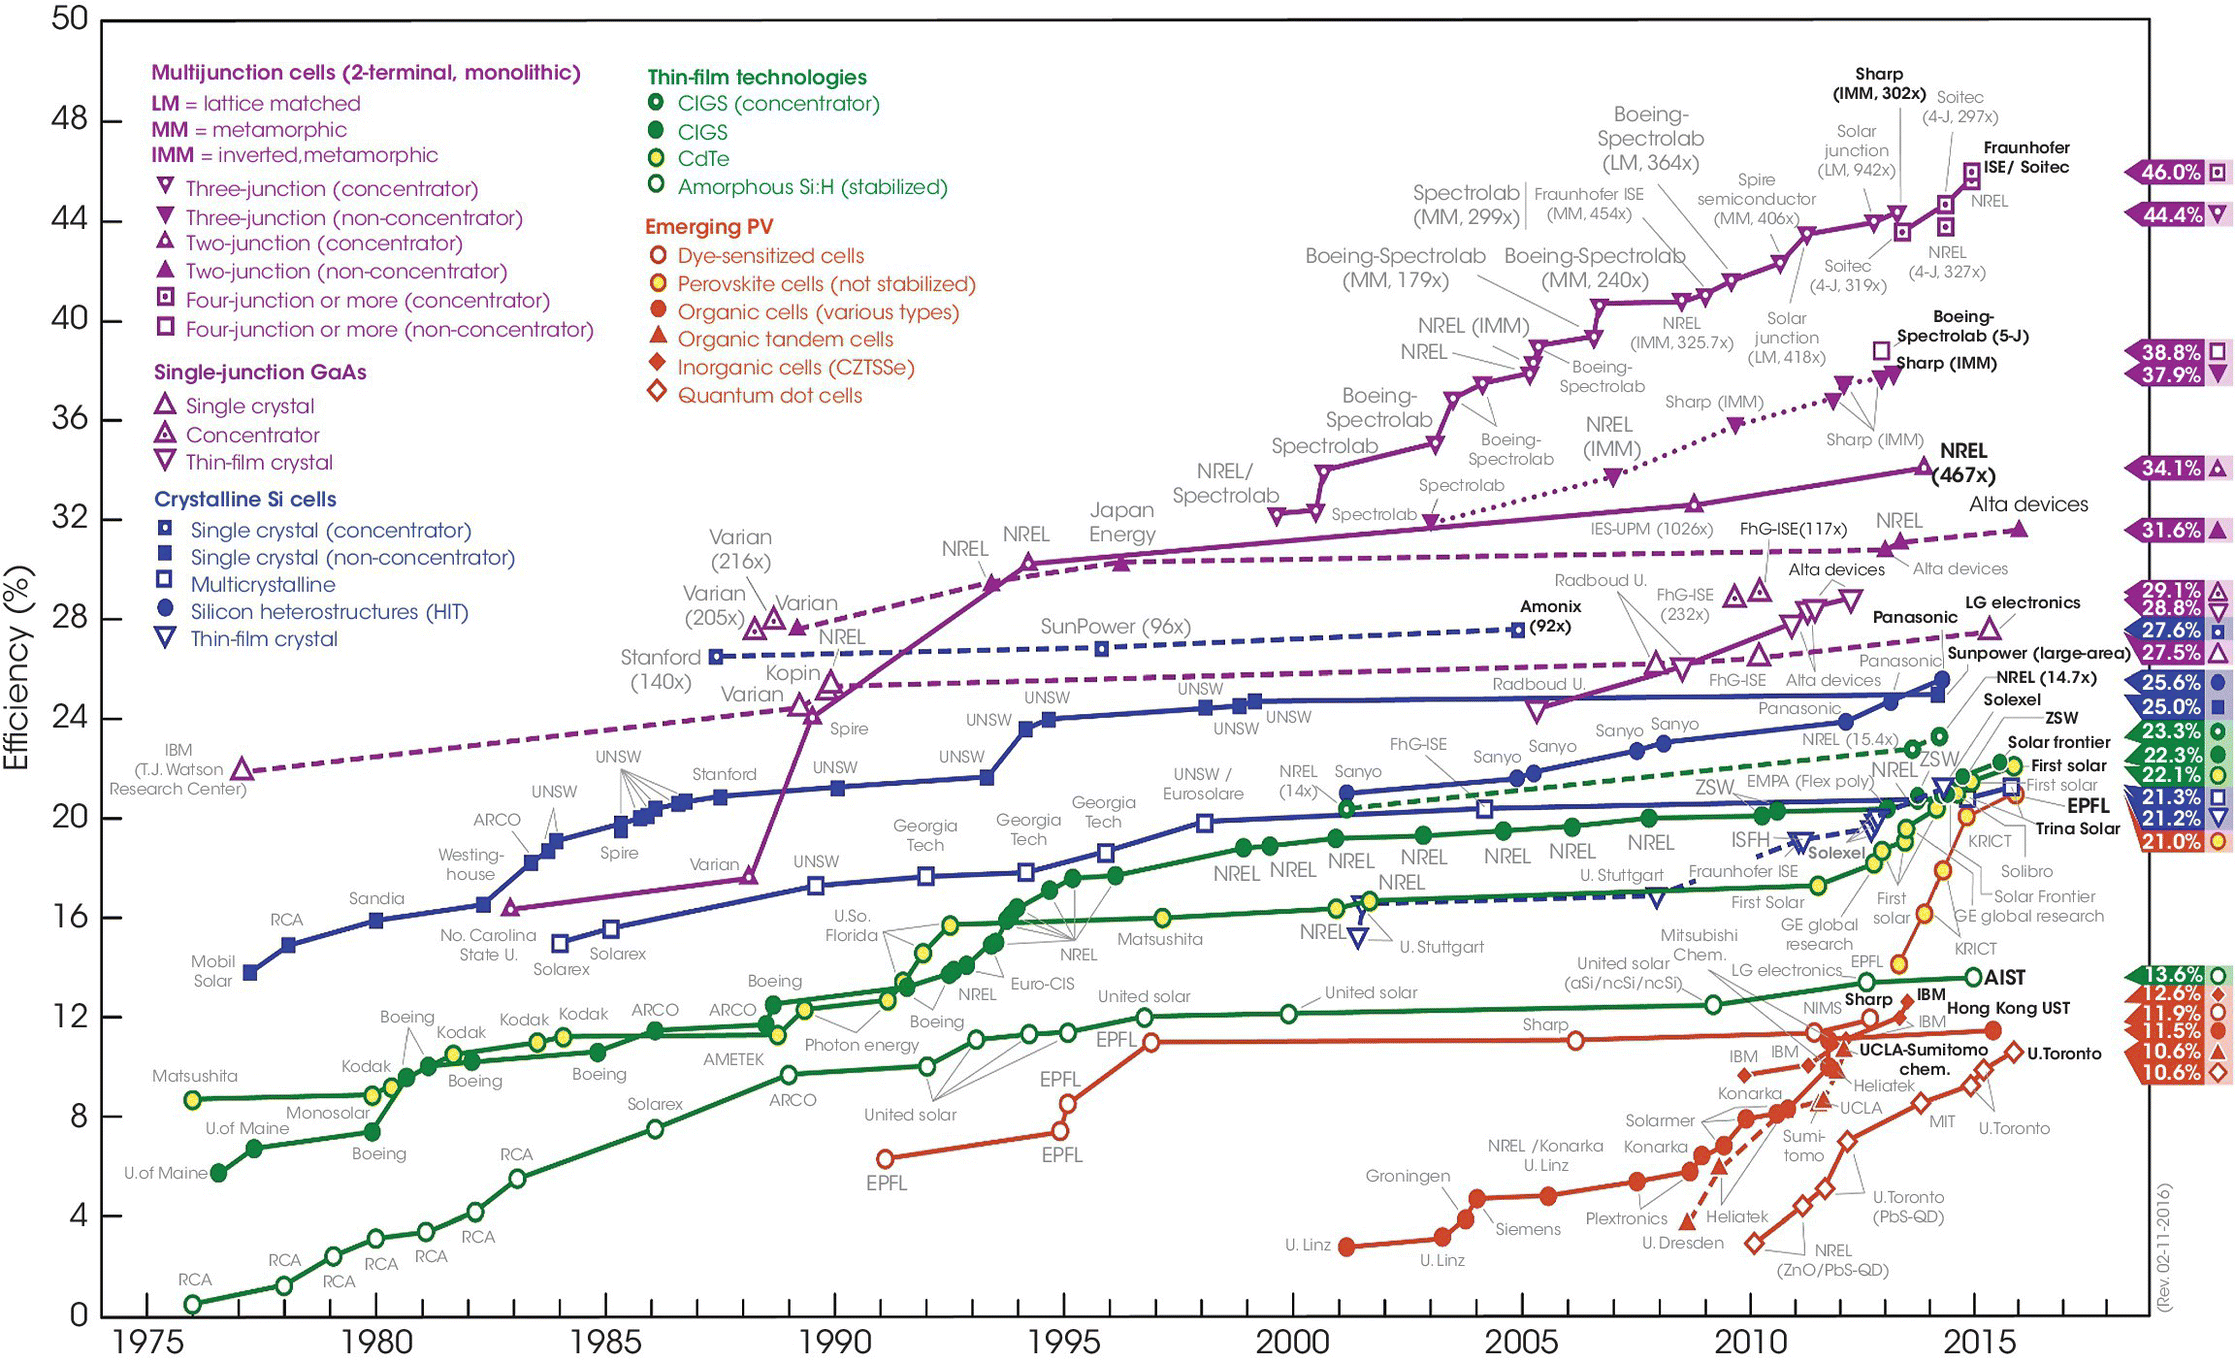 Graph of year vs. efficiency (%) displaying ascending curves with discrete markers for single crystal, concentrator, multicrystalline, two-junction (non-concentrator), CIGS (concentrator), CdTe, etc.